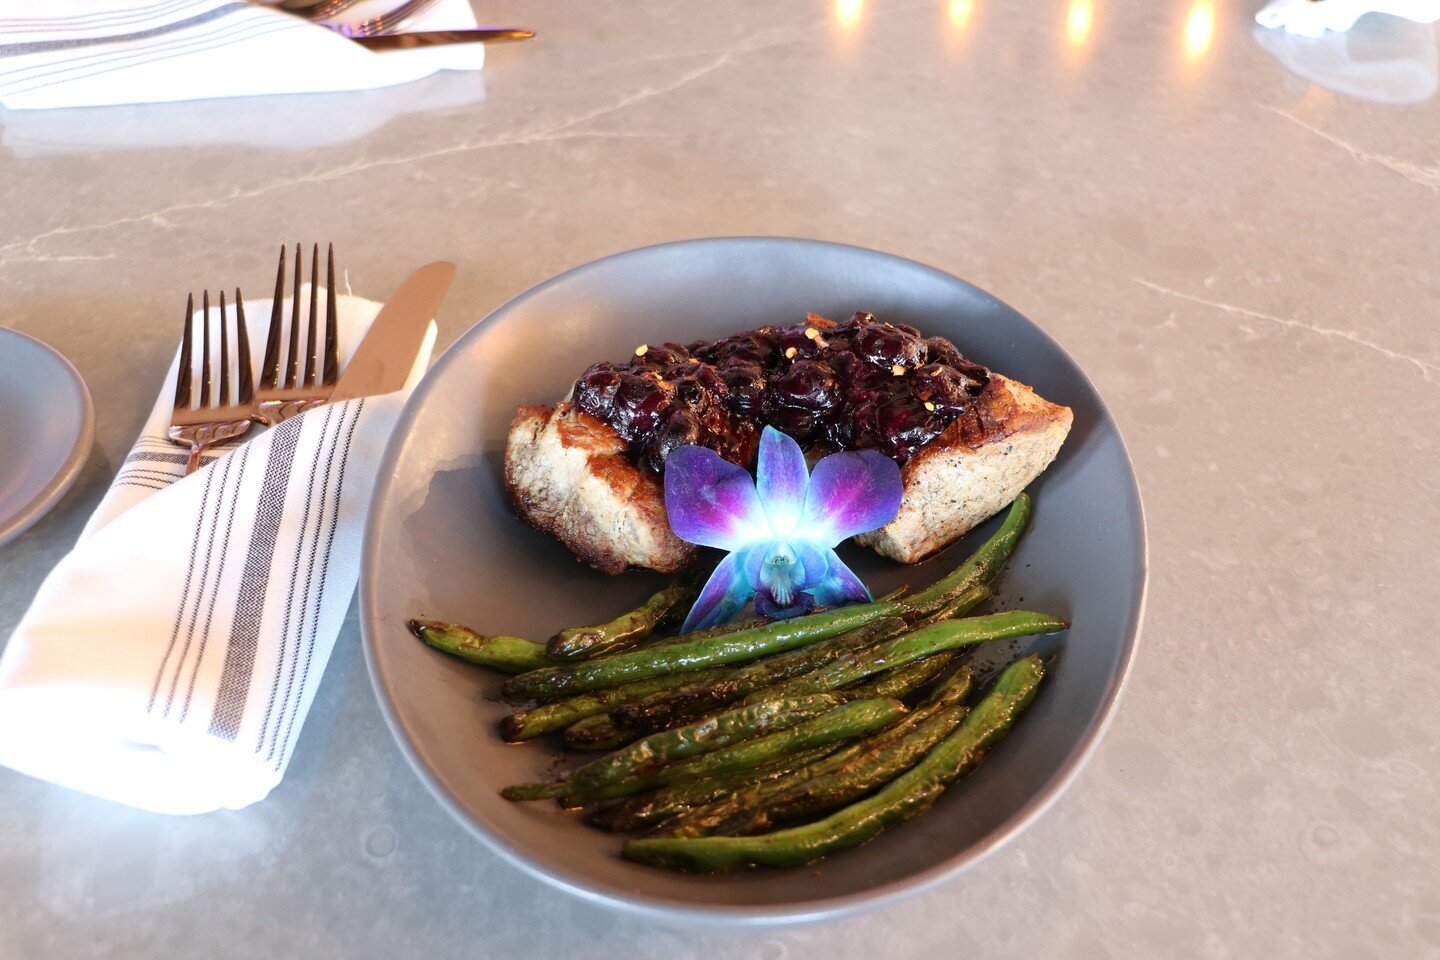 Dinner is Served...

Tonight's Special is Pork Tenderloin covered in macerated blueberries served with brown sugar green beans.